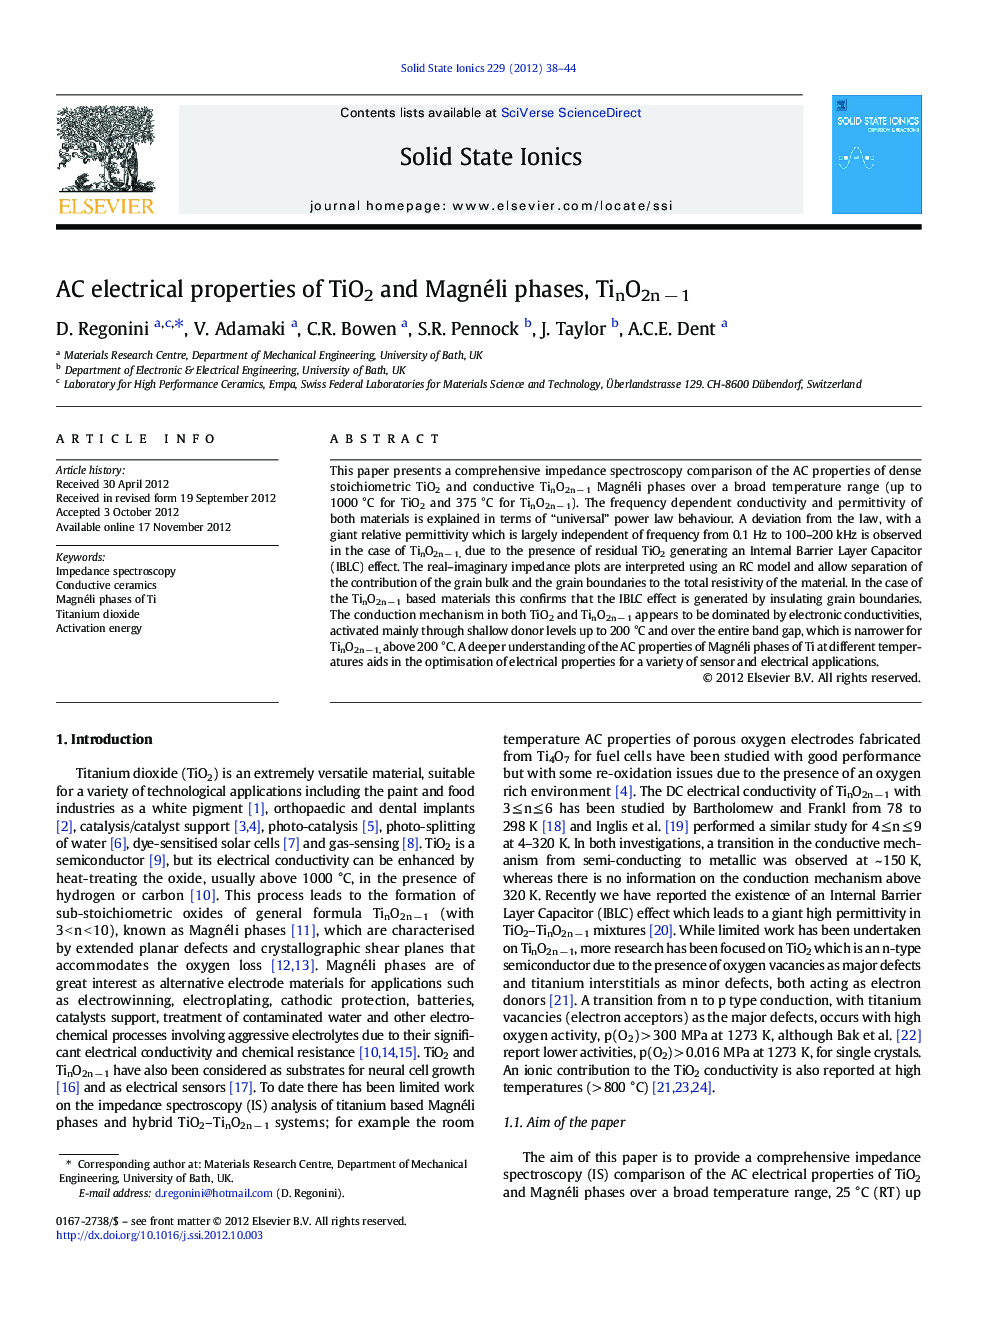 AC electrical properties of TiO2 and Magnéli phases, TinO2n − 1